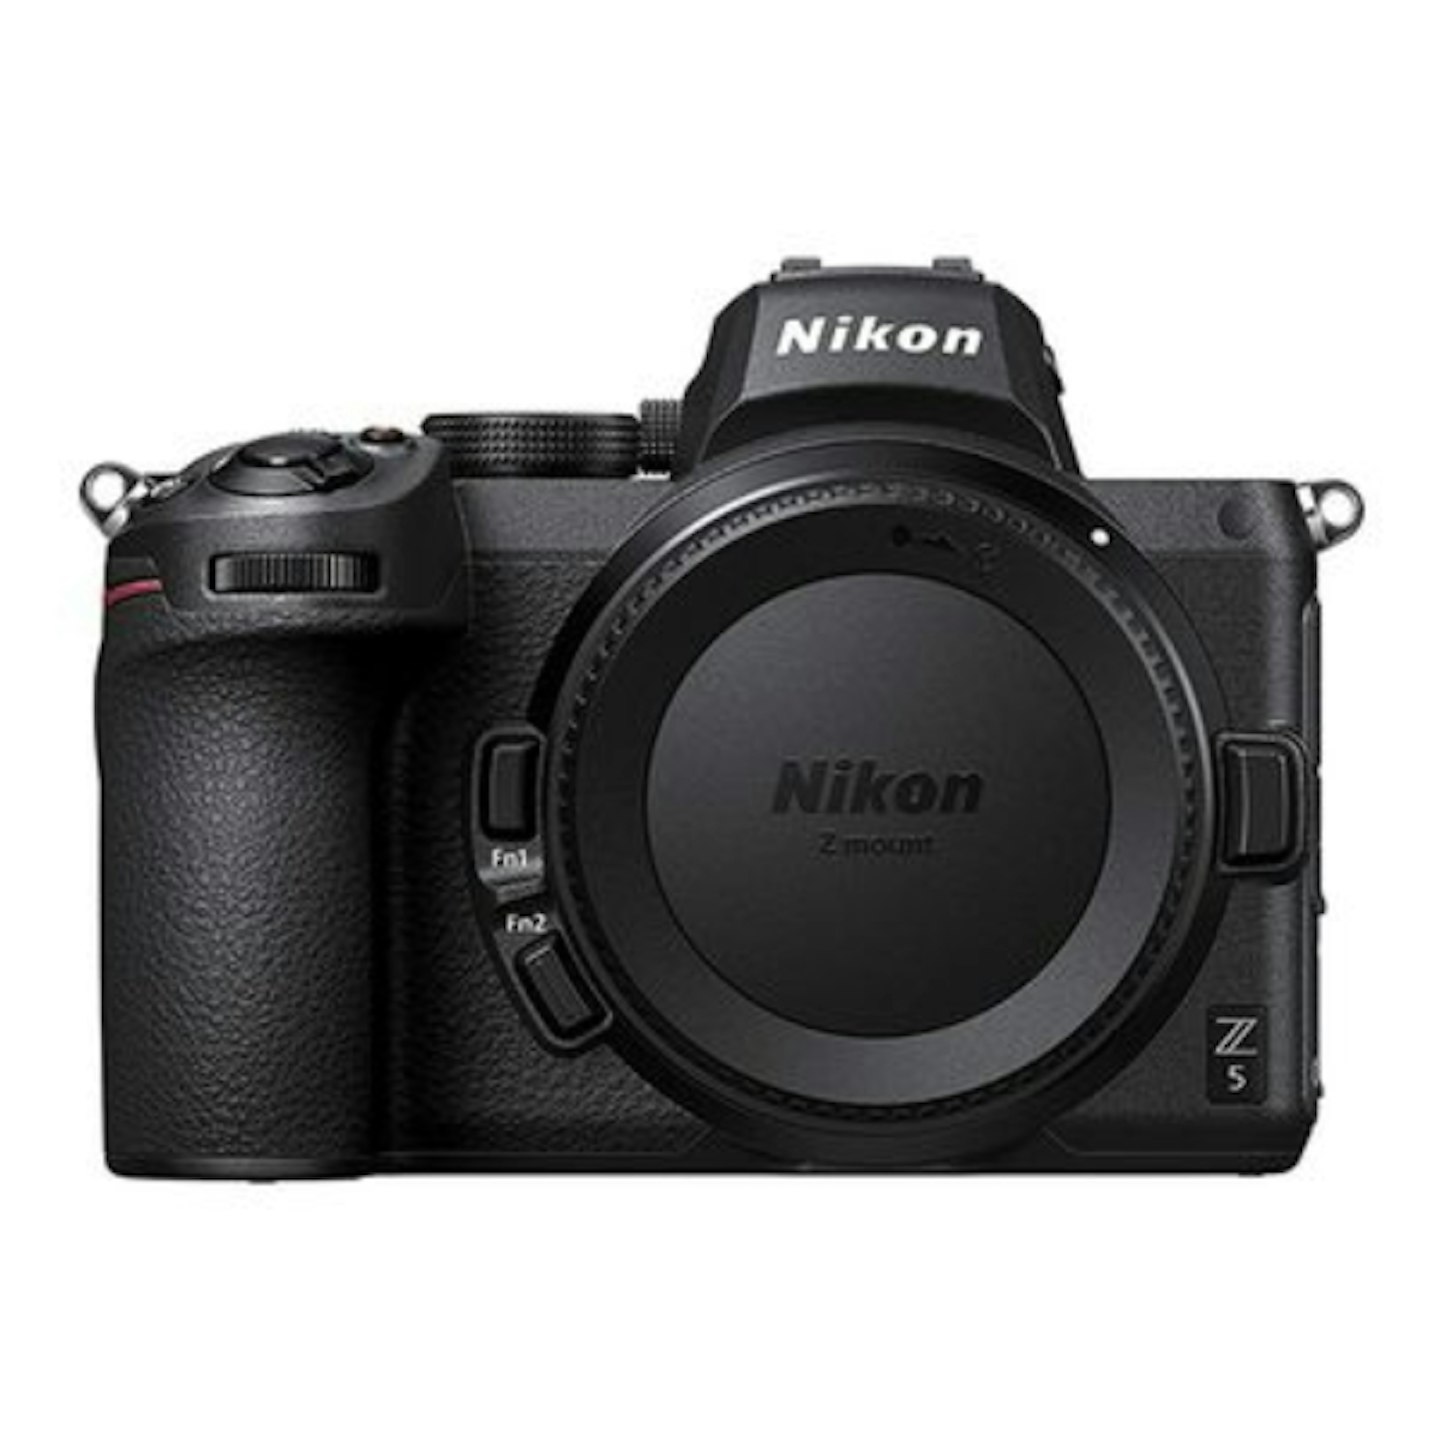 The Best Nikon Cameras: From Beginners To Professionals